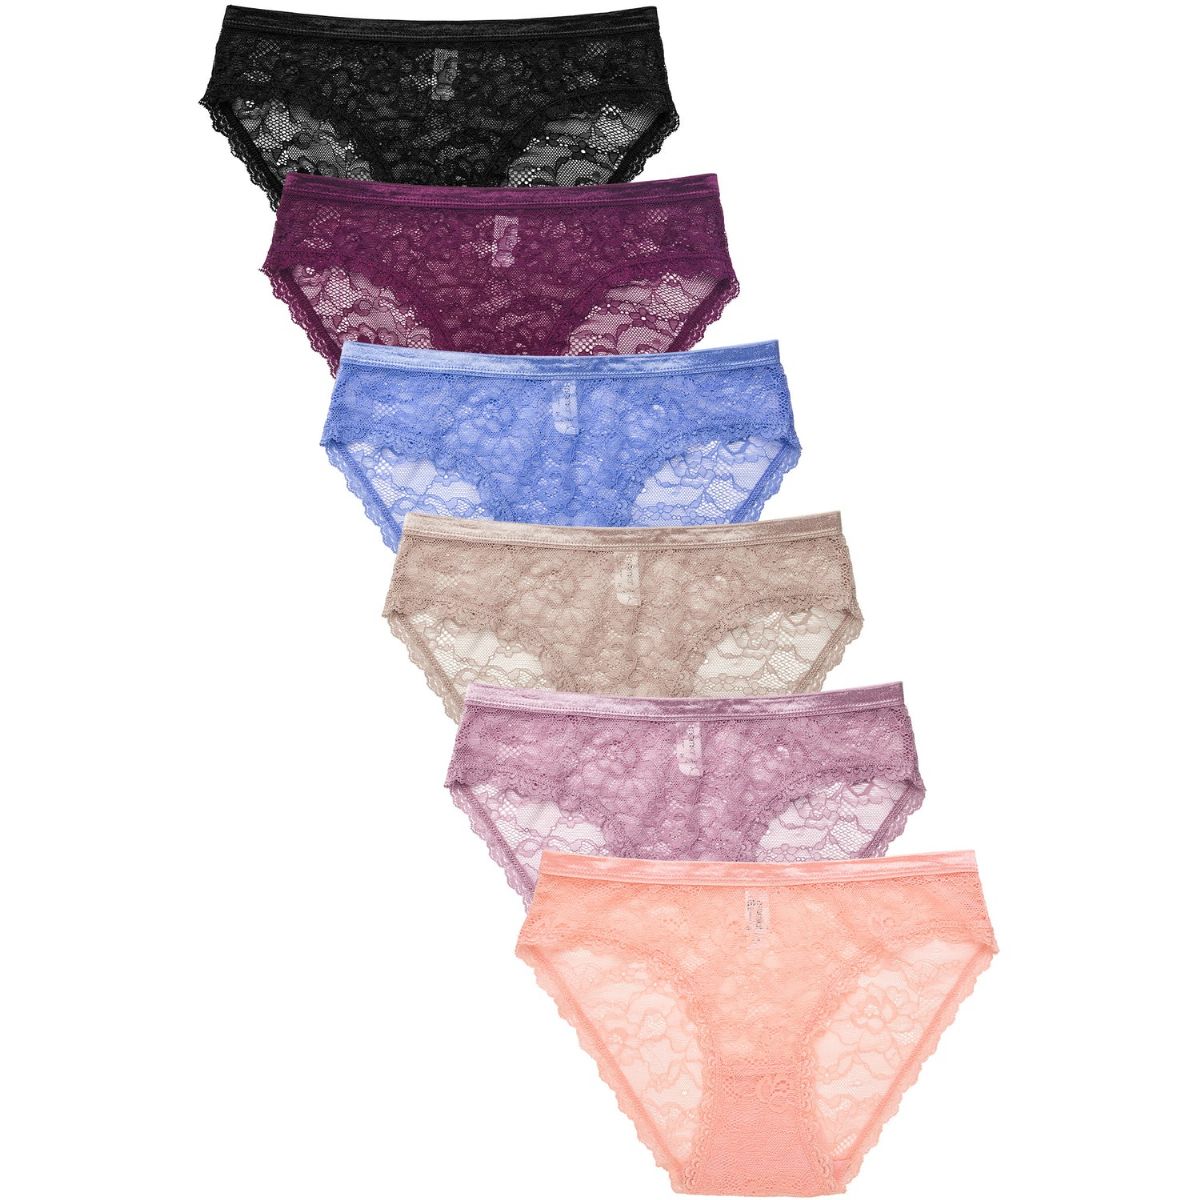 432 Pieces Sofra Ladies Lace G-String Panty - Womens Panties & Underwear -  at 